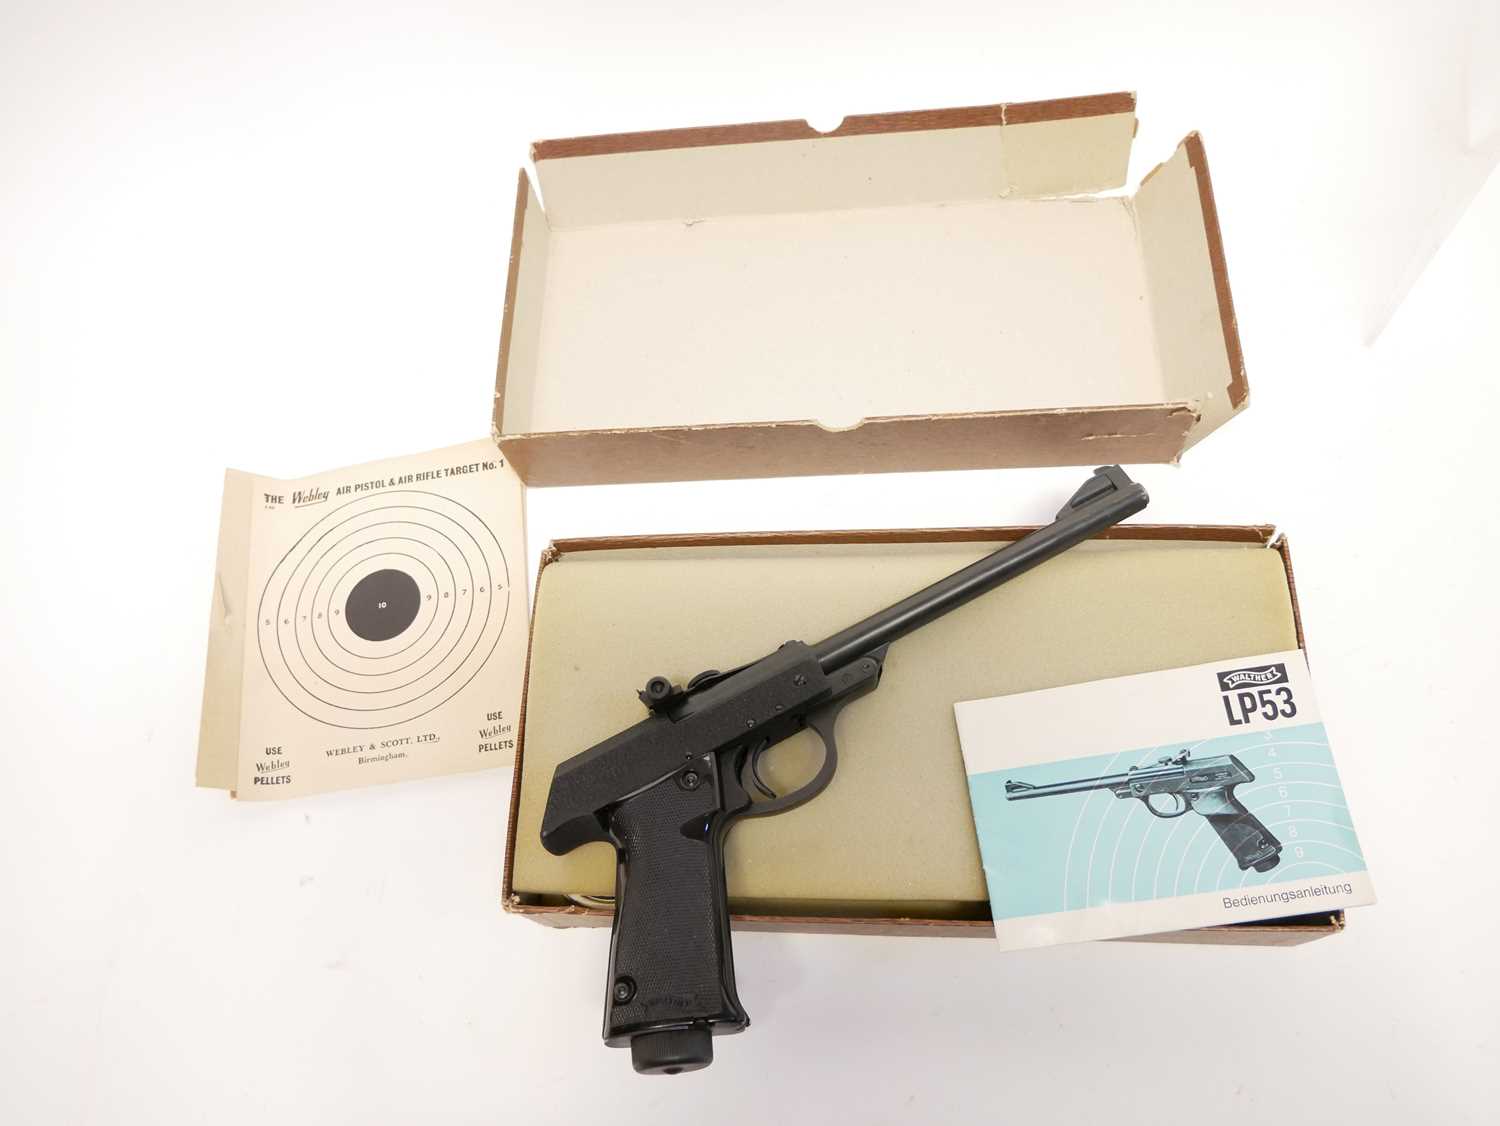 Boxed Walther .177 Model LP.53 air pistol (Luftpistole), 9.5inch barrel, serial number 118326, - Image 10 of 12